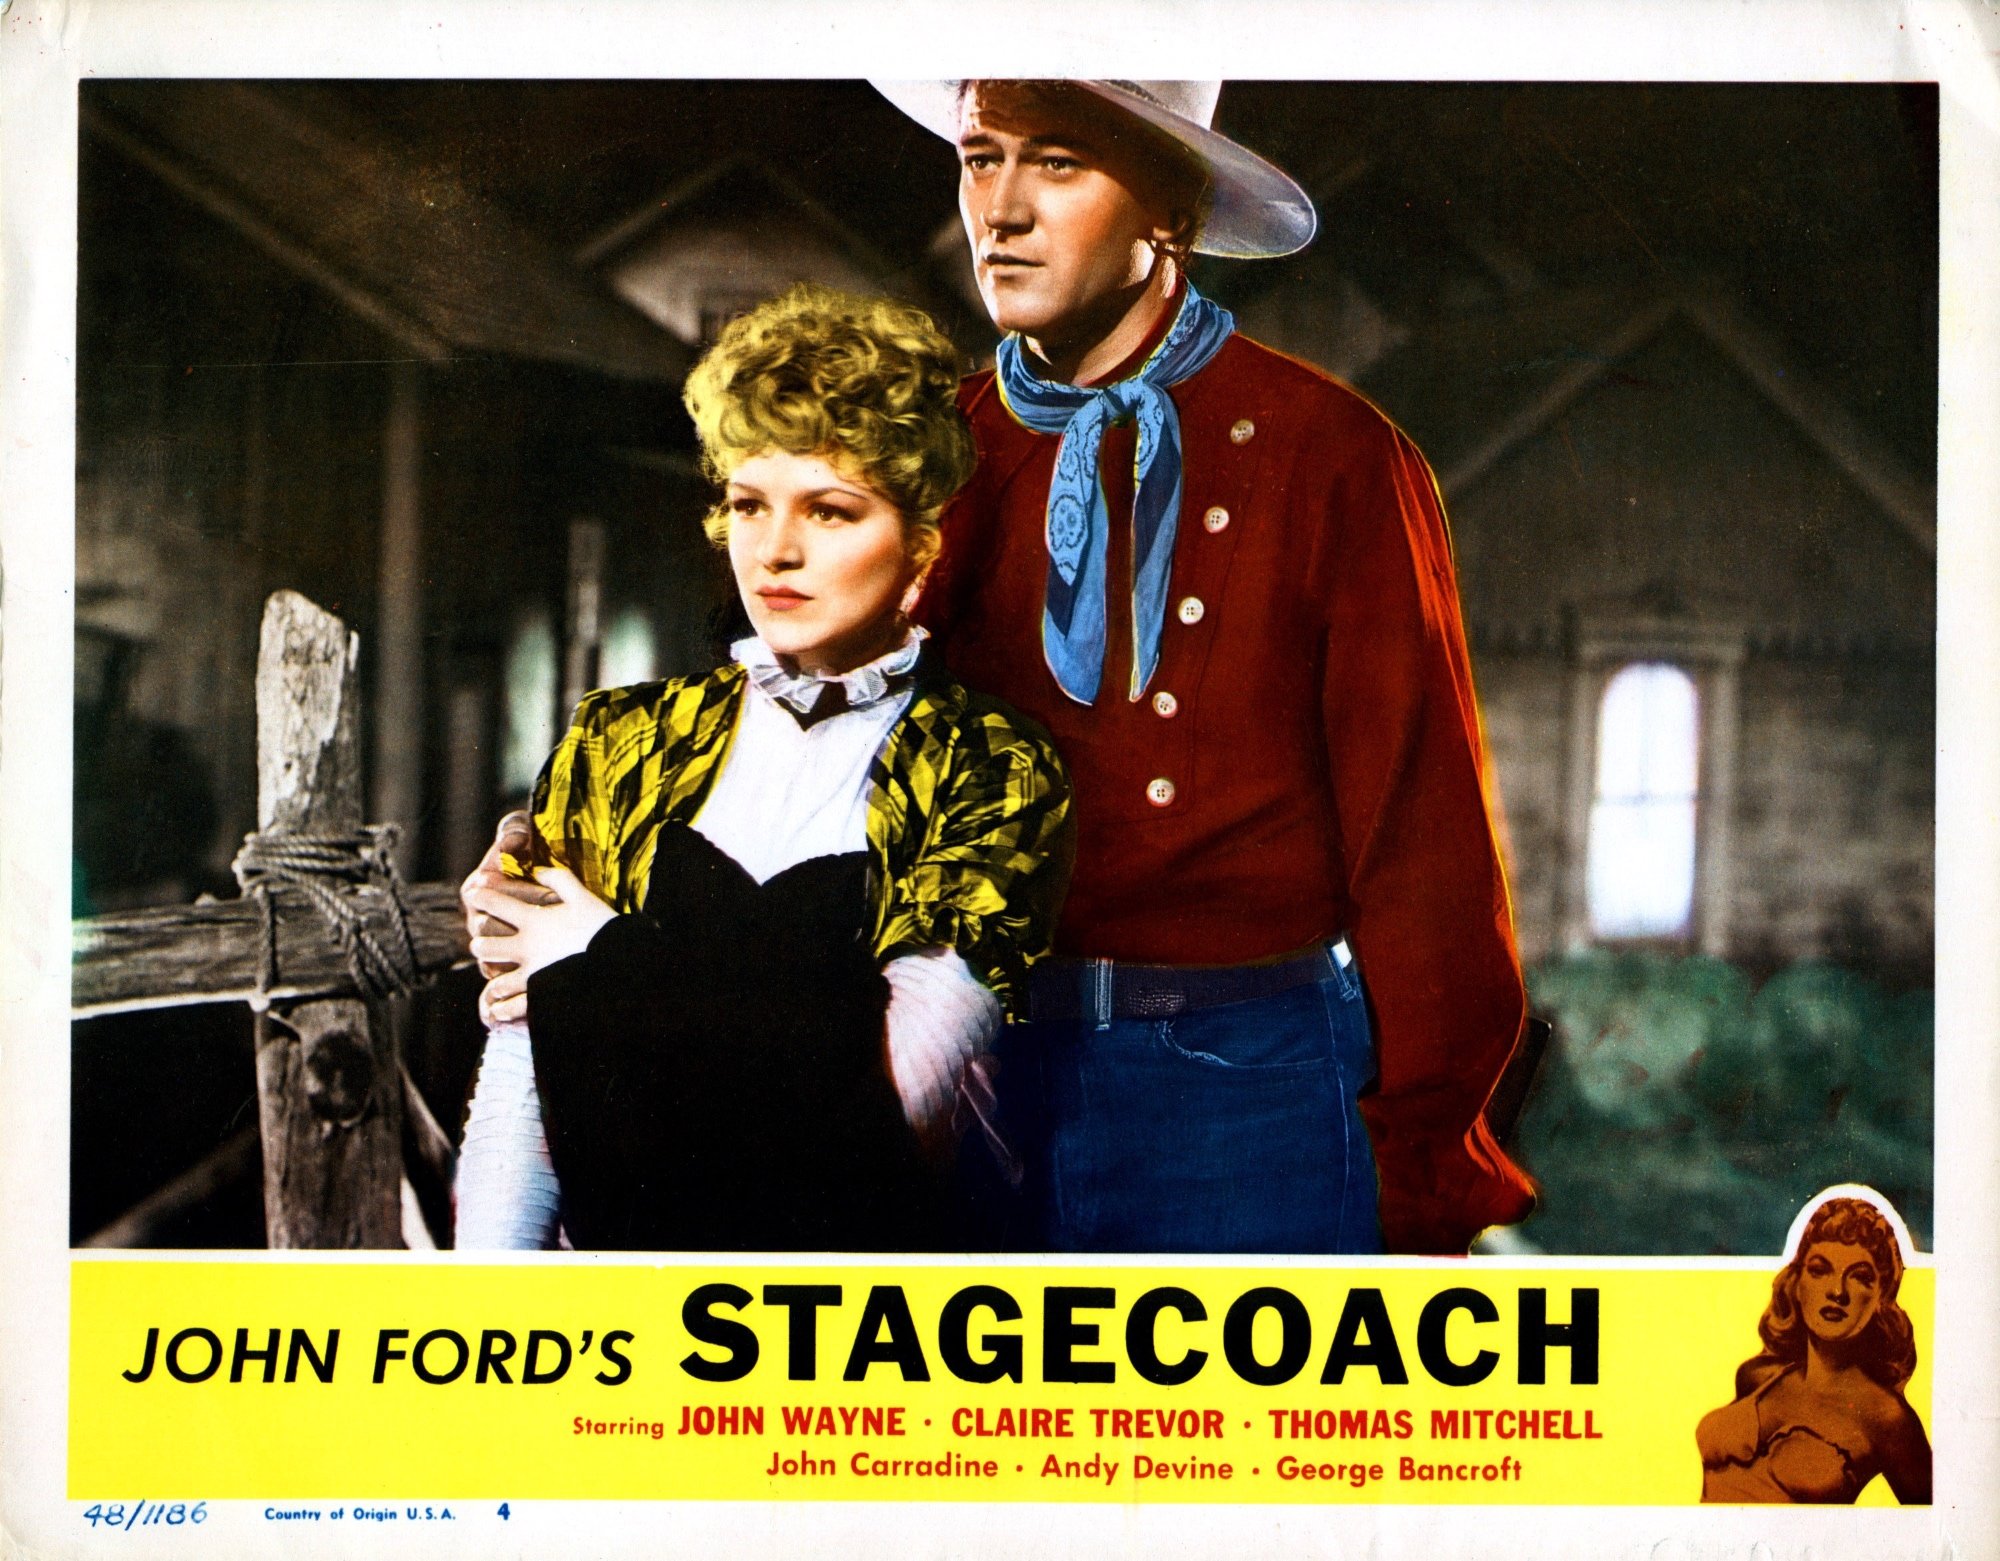 John Ford film 'Stagecoach' Claire Trevor as Dallas and John Wayne as Ringo Kid standing with his arm around her